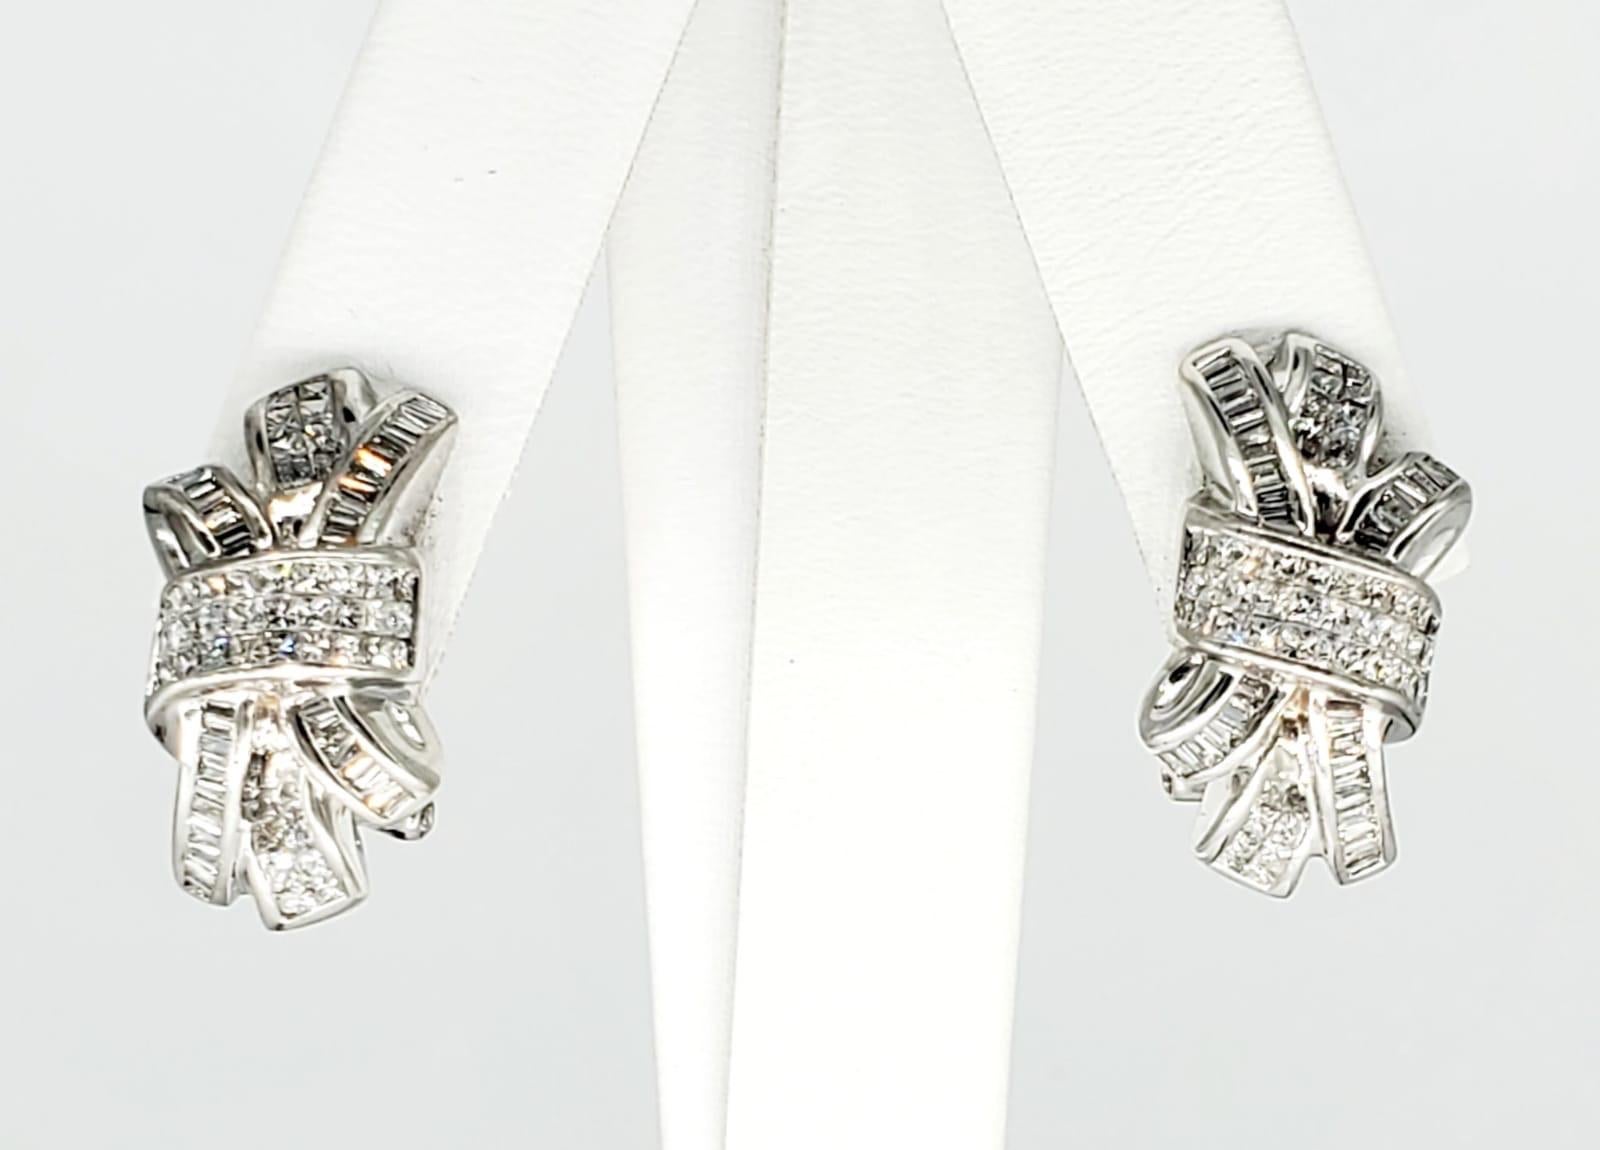 6 Carats VS Clarity Total Diamond Weight Clip Earrings. There is an approx total of 6 carats of baguette and princess cut H/VS Clarity diamonds all over these magnificent pair of diamond earrings. The designer JPM really did a good job on this pair.